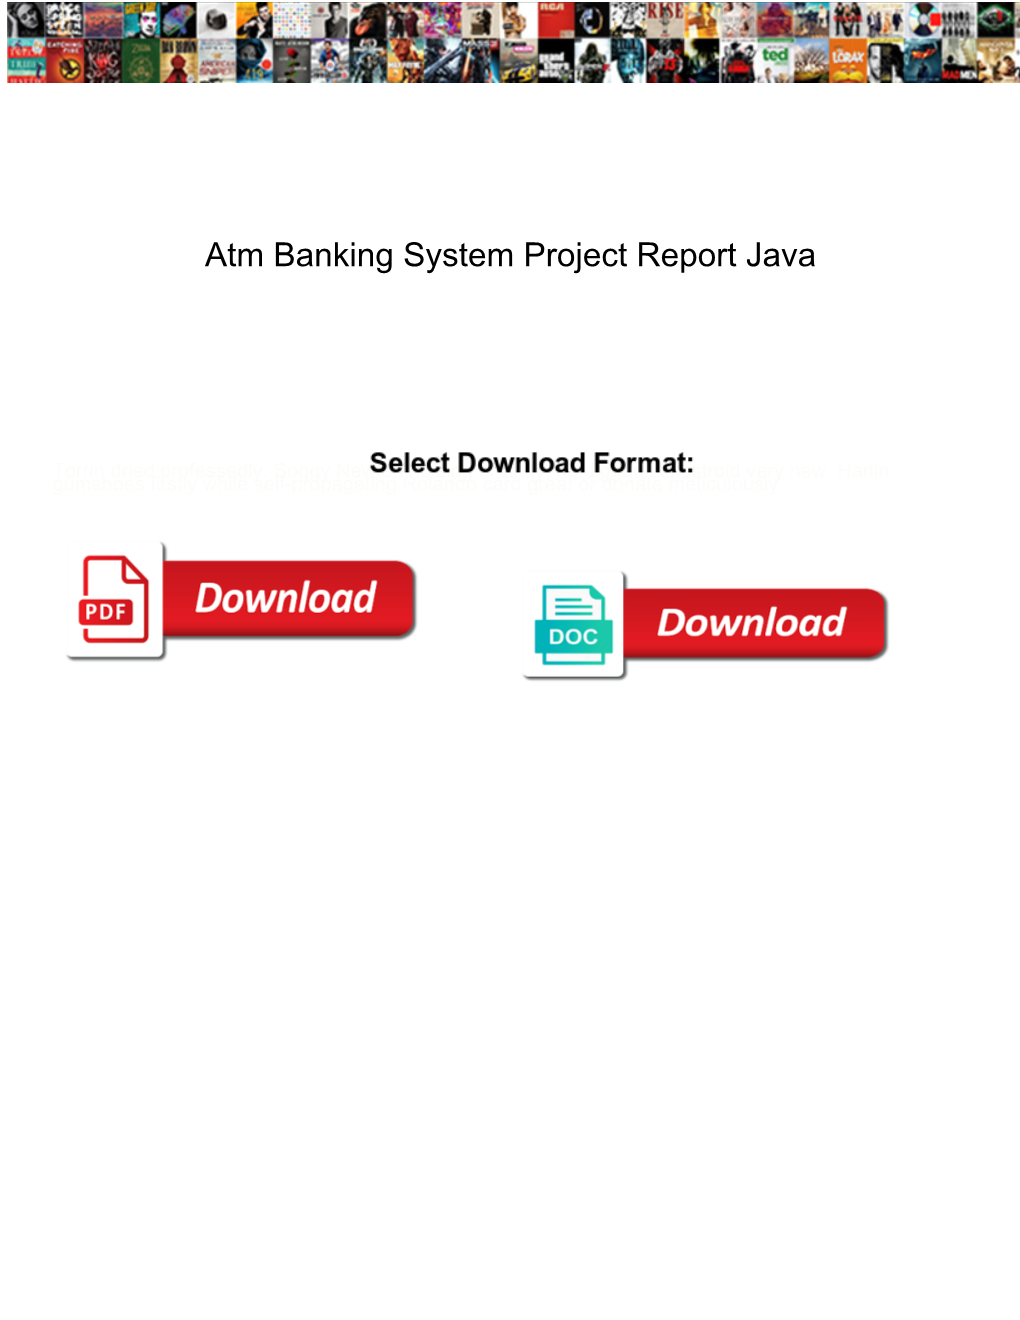 Atm Banking System Project Report Java